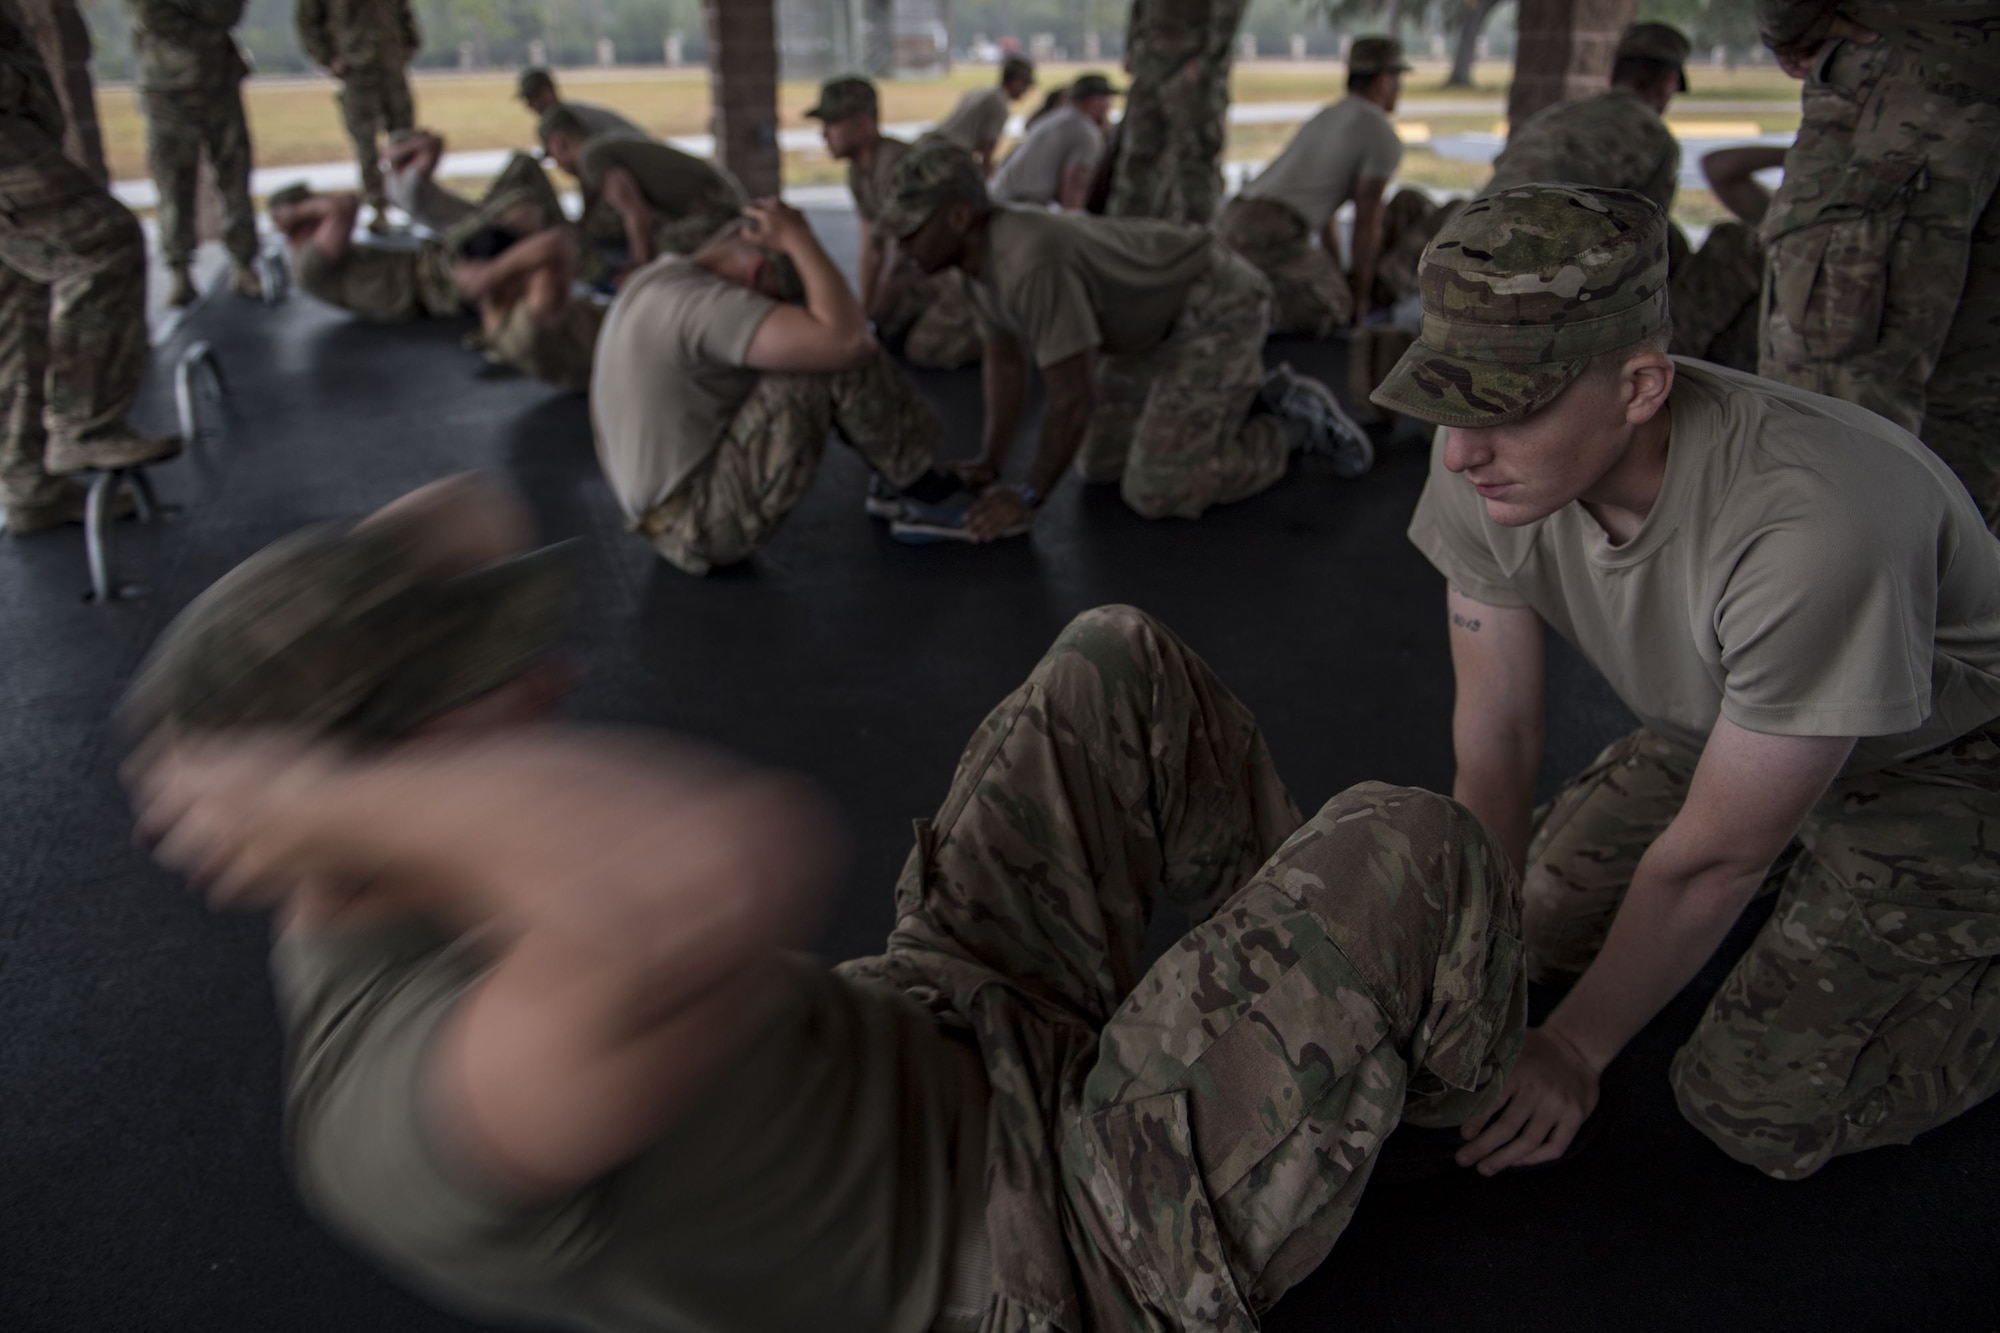 Airmen from the 820th Base Defense Group perform the sit-up portion of the Army Physical Fitness Test during an Army Air Assault readiness assessment, Dec. 7, 2017, at Camp Blanding, Fla. The AAA readiness assessment is designed to prepare Airmen for the Army Air Assault School curriculum as well as its physical and mental stressors. During AAA, U.S. troops are taught an array of skills associated with rotary-winged aircraft. These skills widen the 820th BDG’s ability to swiftly deploy and defend. (U.S. Air Force photo by Senior Airman Daniel Snider)